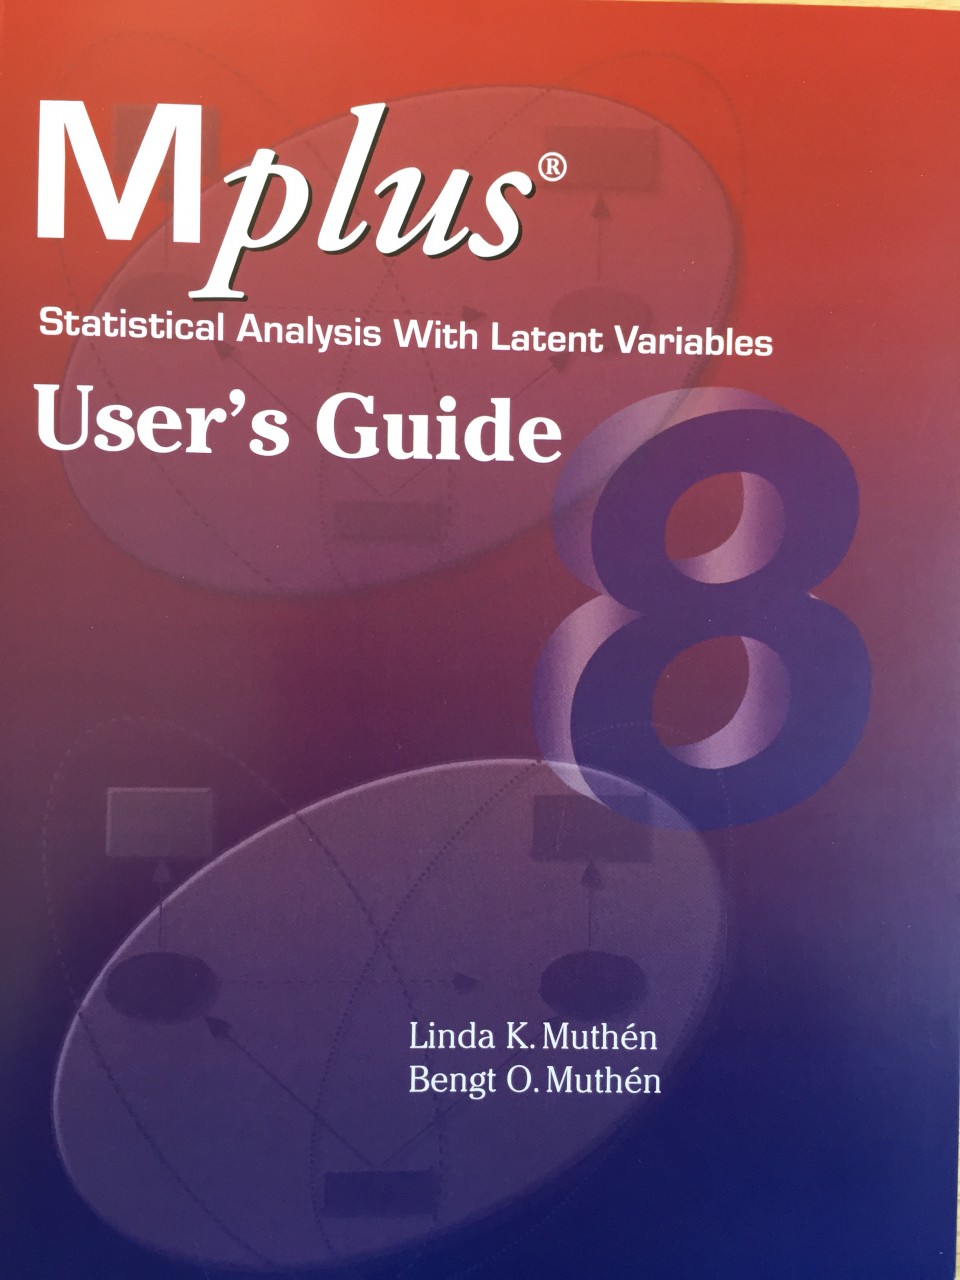 Mplus Version 8 User's Guide - Muthen & Muthen